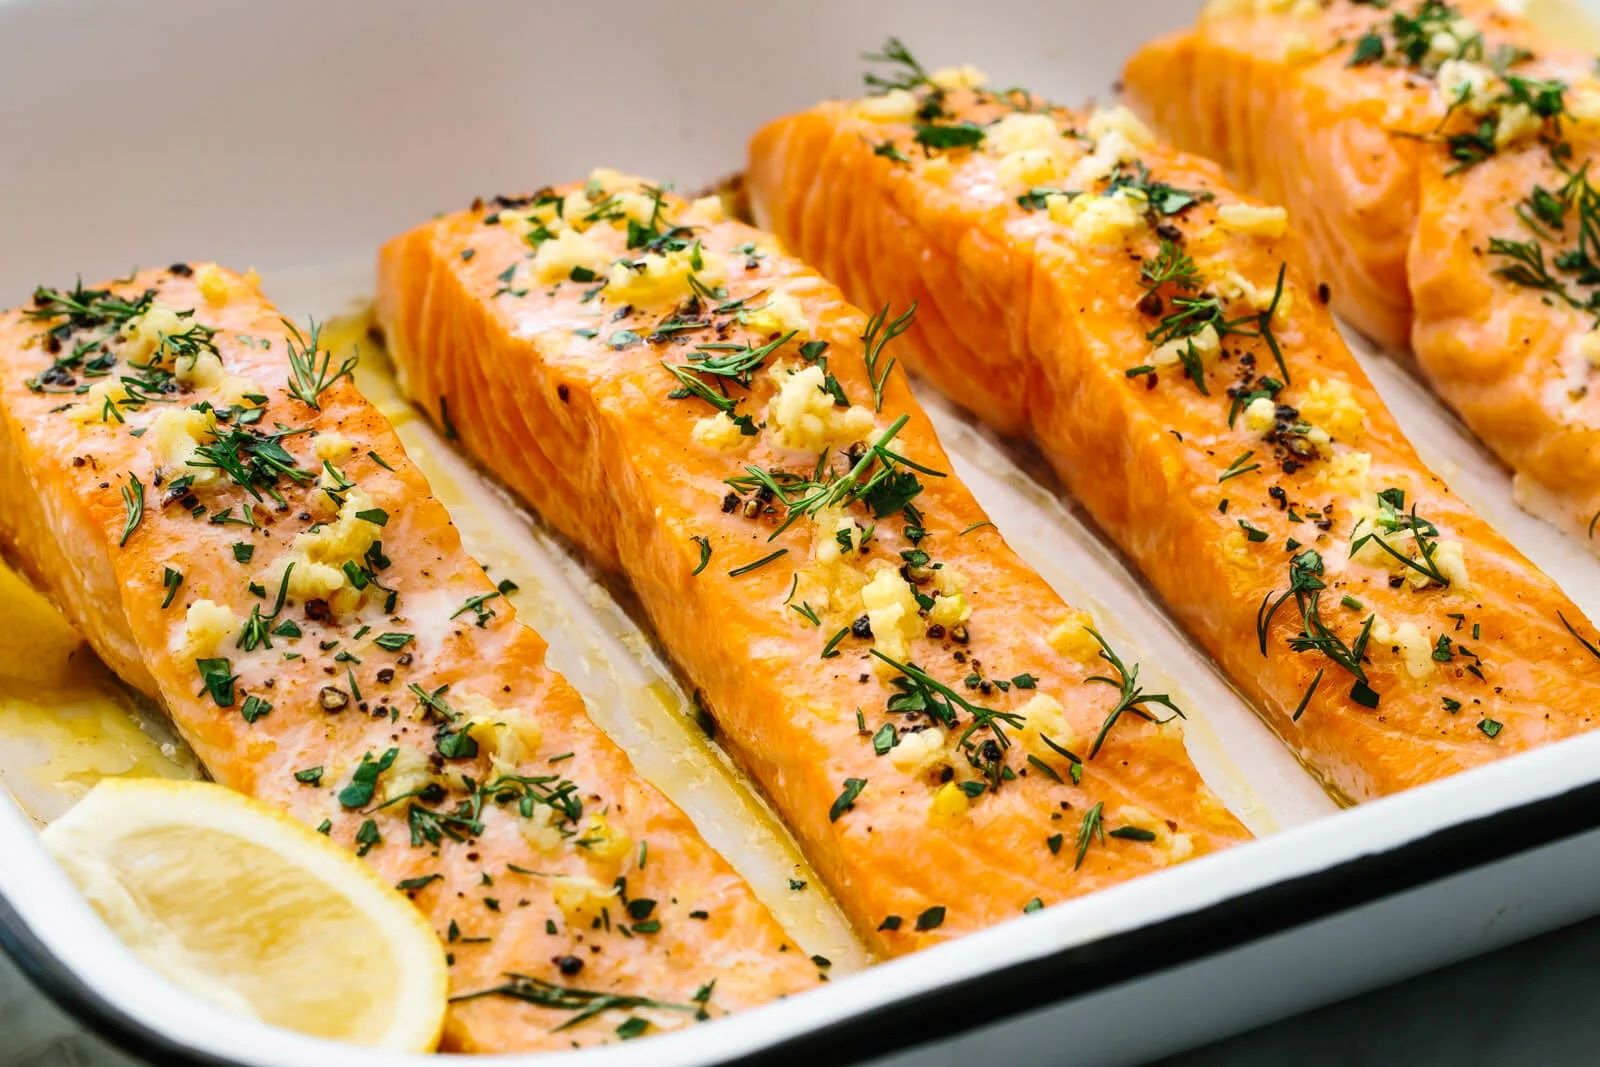 The Perfect Oven Baking Time For Salmon Fillets Revealed!